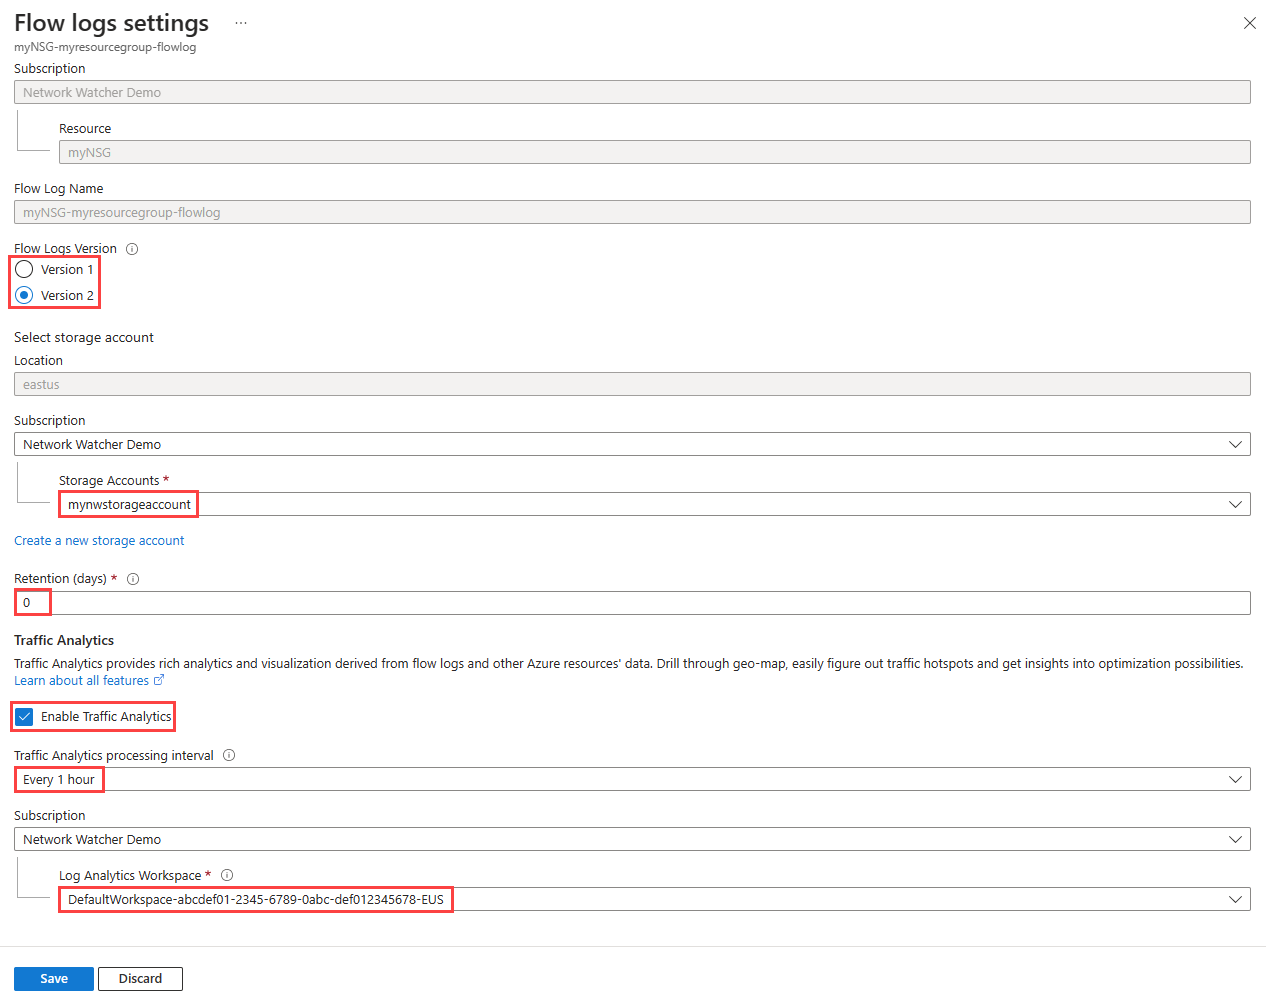 Screenshot of Flow logs settings page in the Azure portal where you can change some settings.